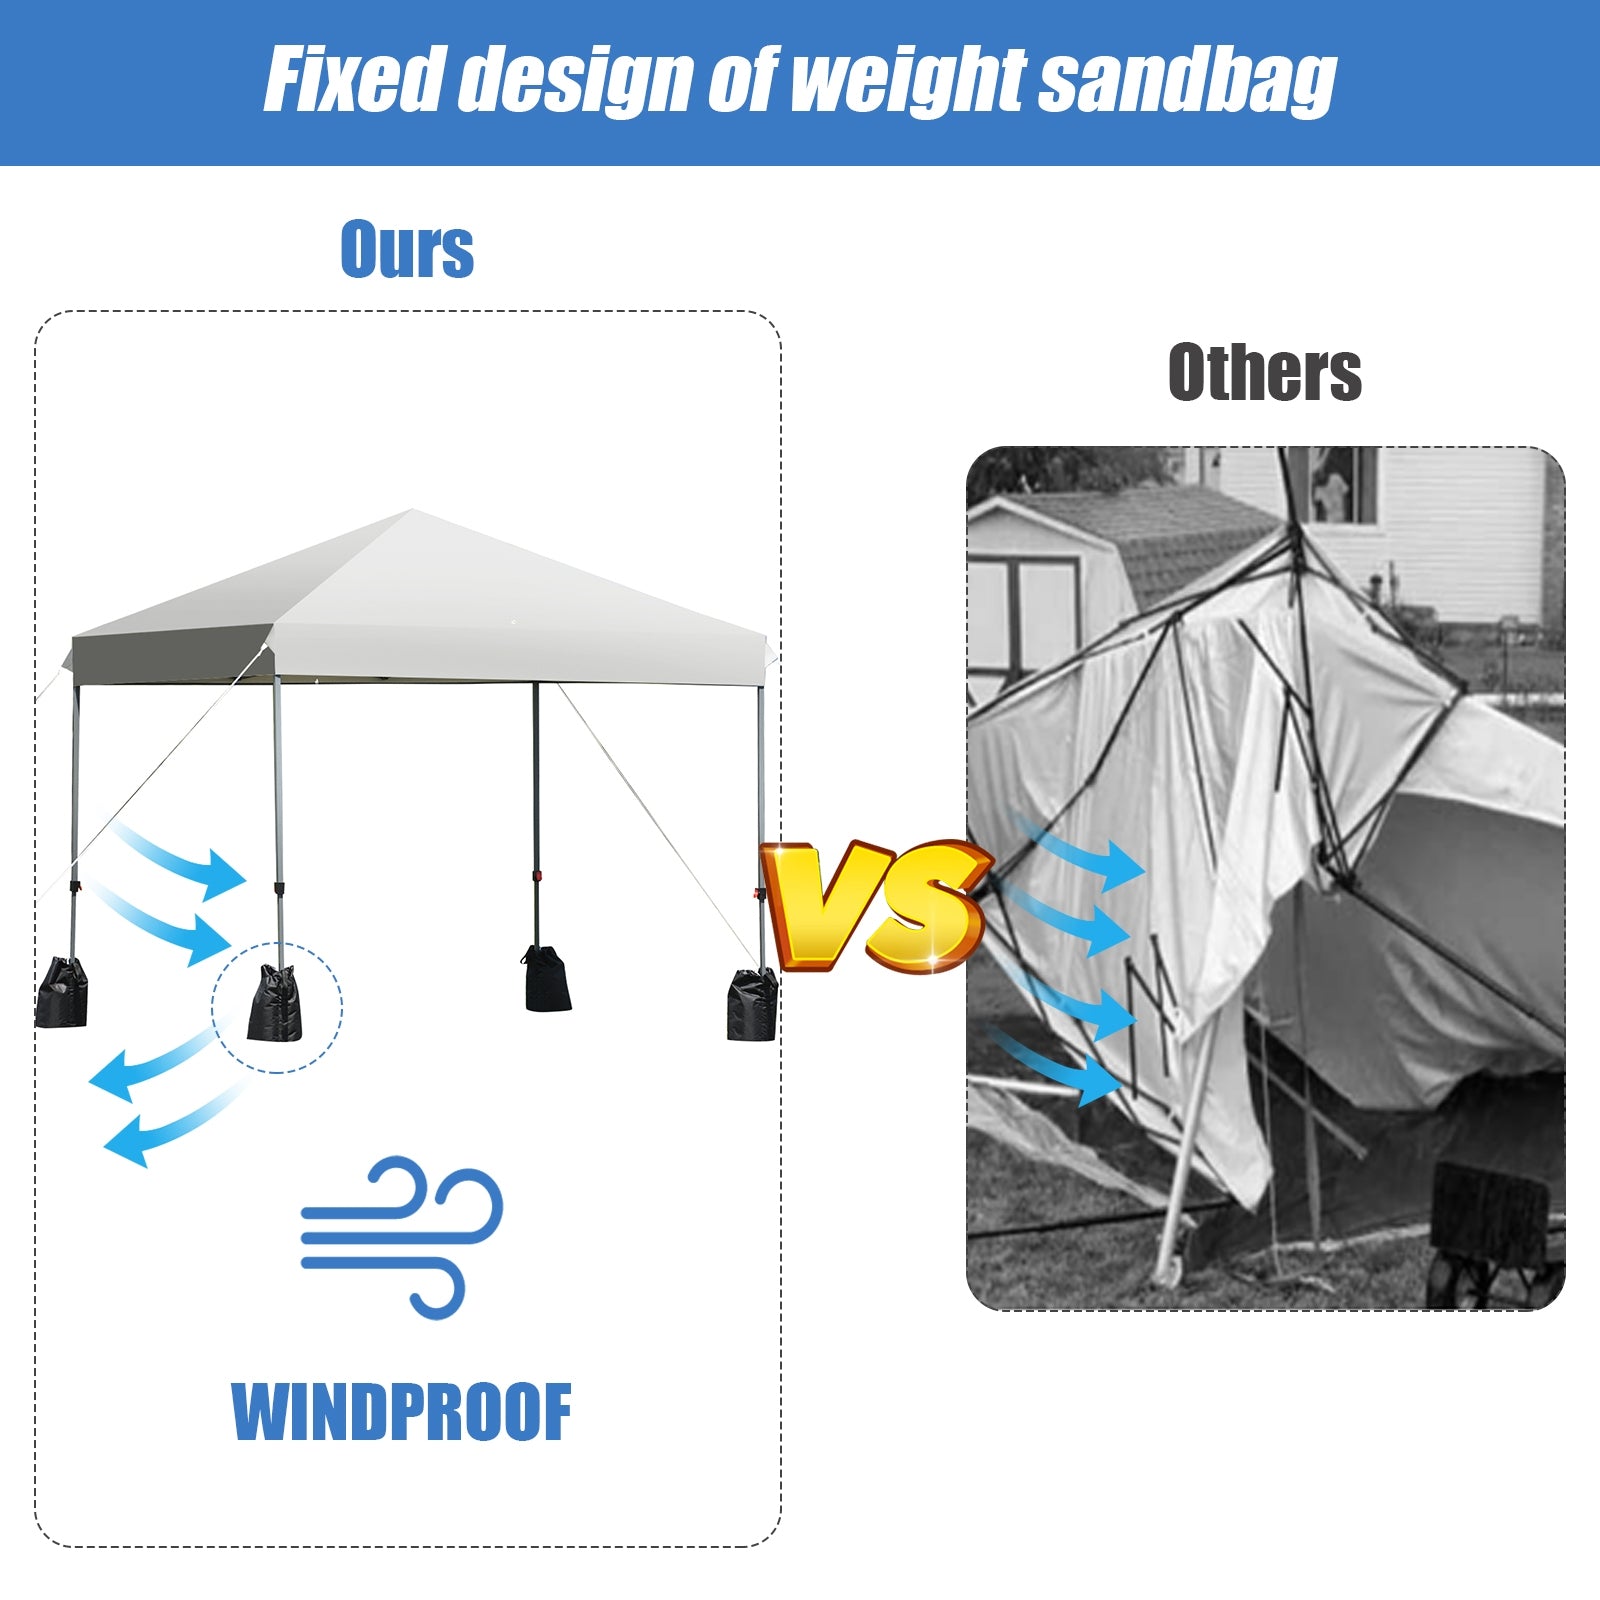 8 x 8 Feet Outdoor Pop-up Canopy Tent with Portable Roller Bag and Sand Bags